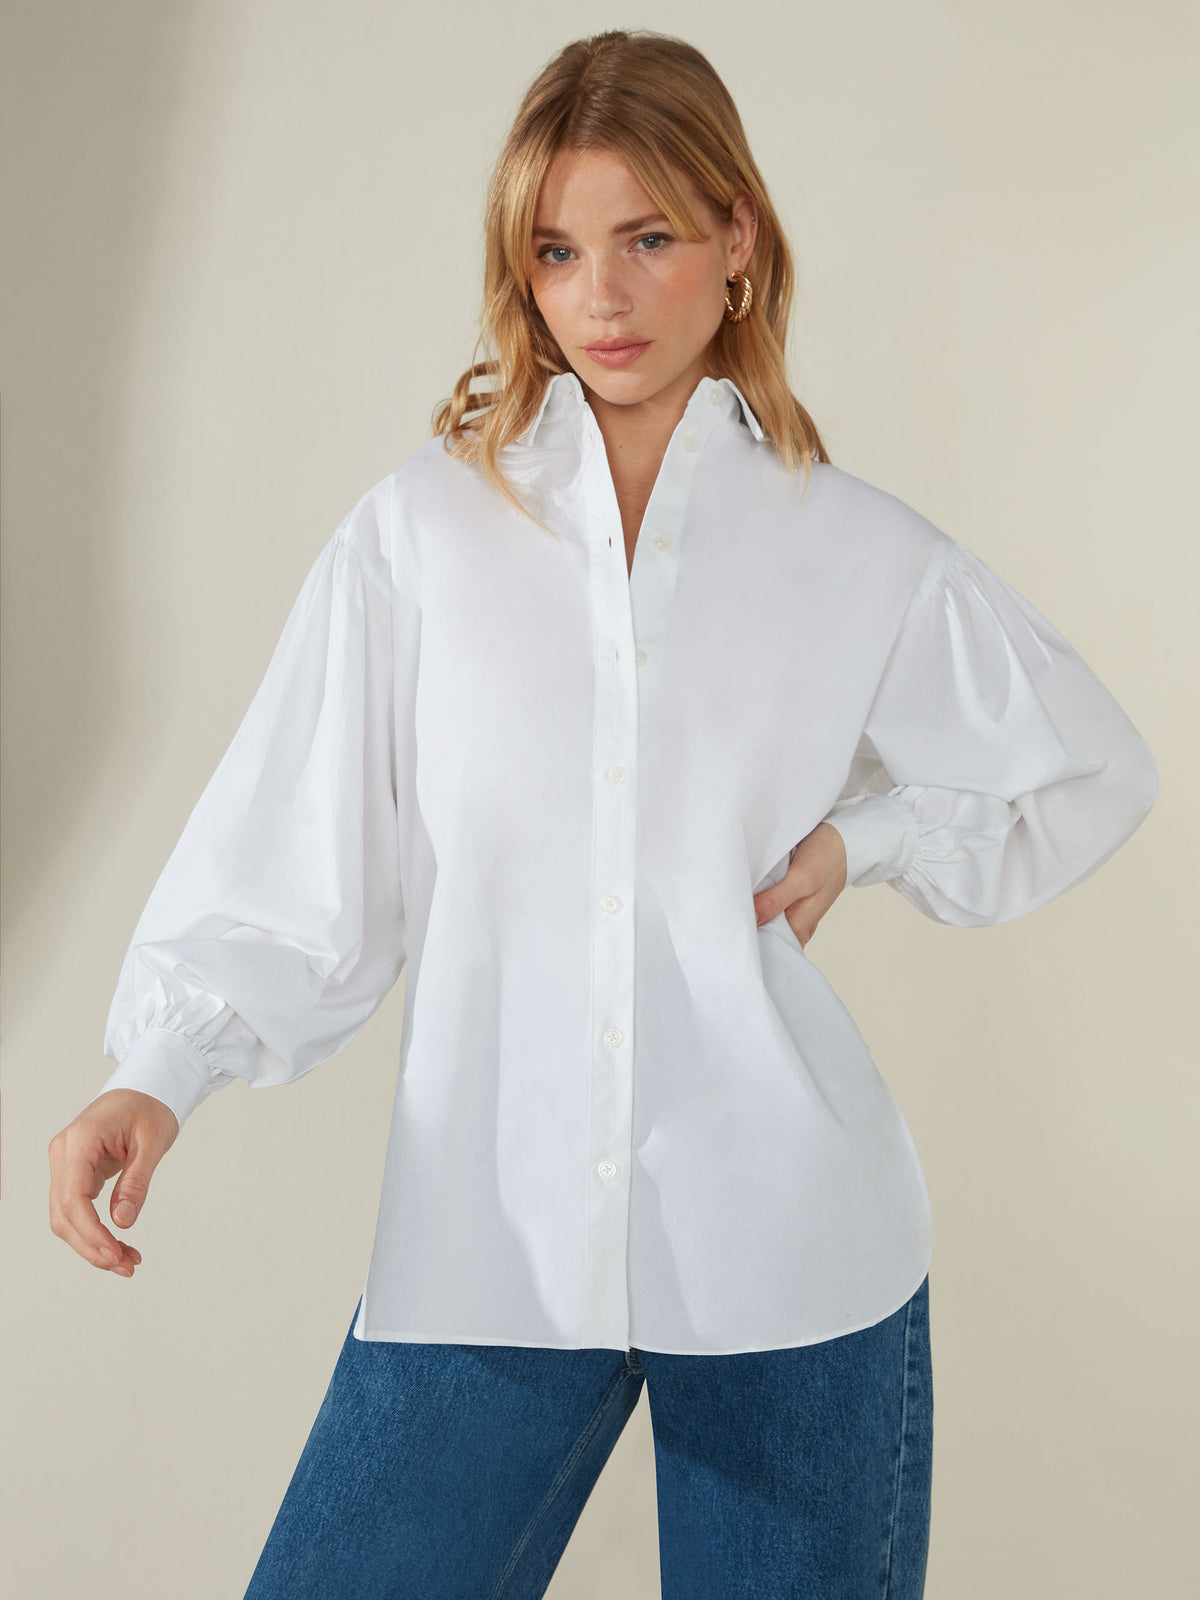 Broderie Anglaise Collar Shirt - Ready-to-Wear 1AB7DI